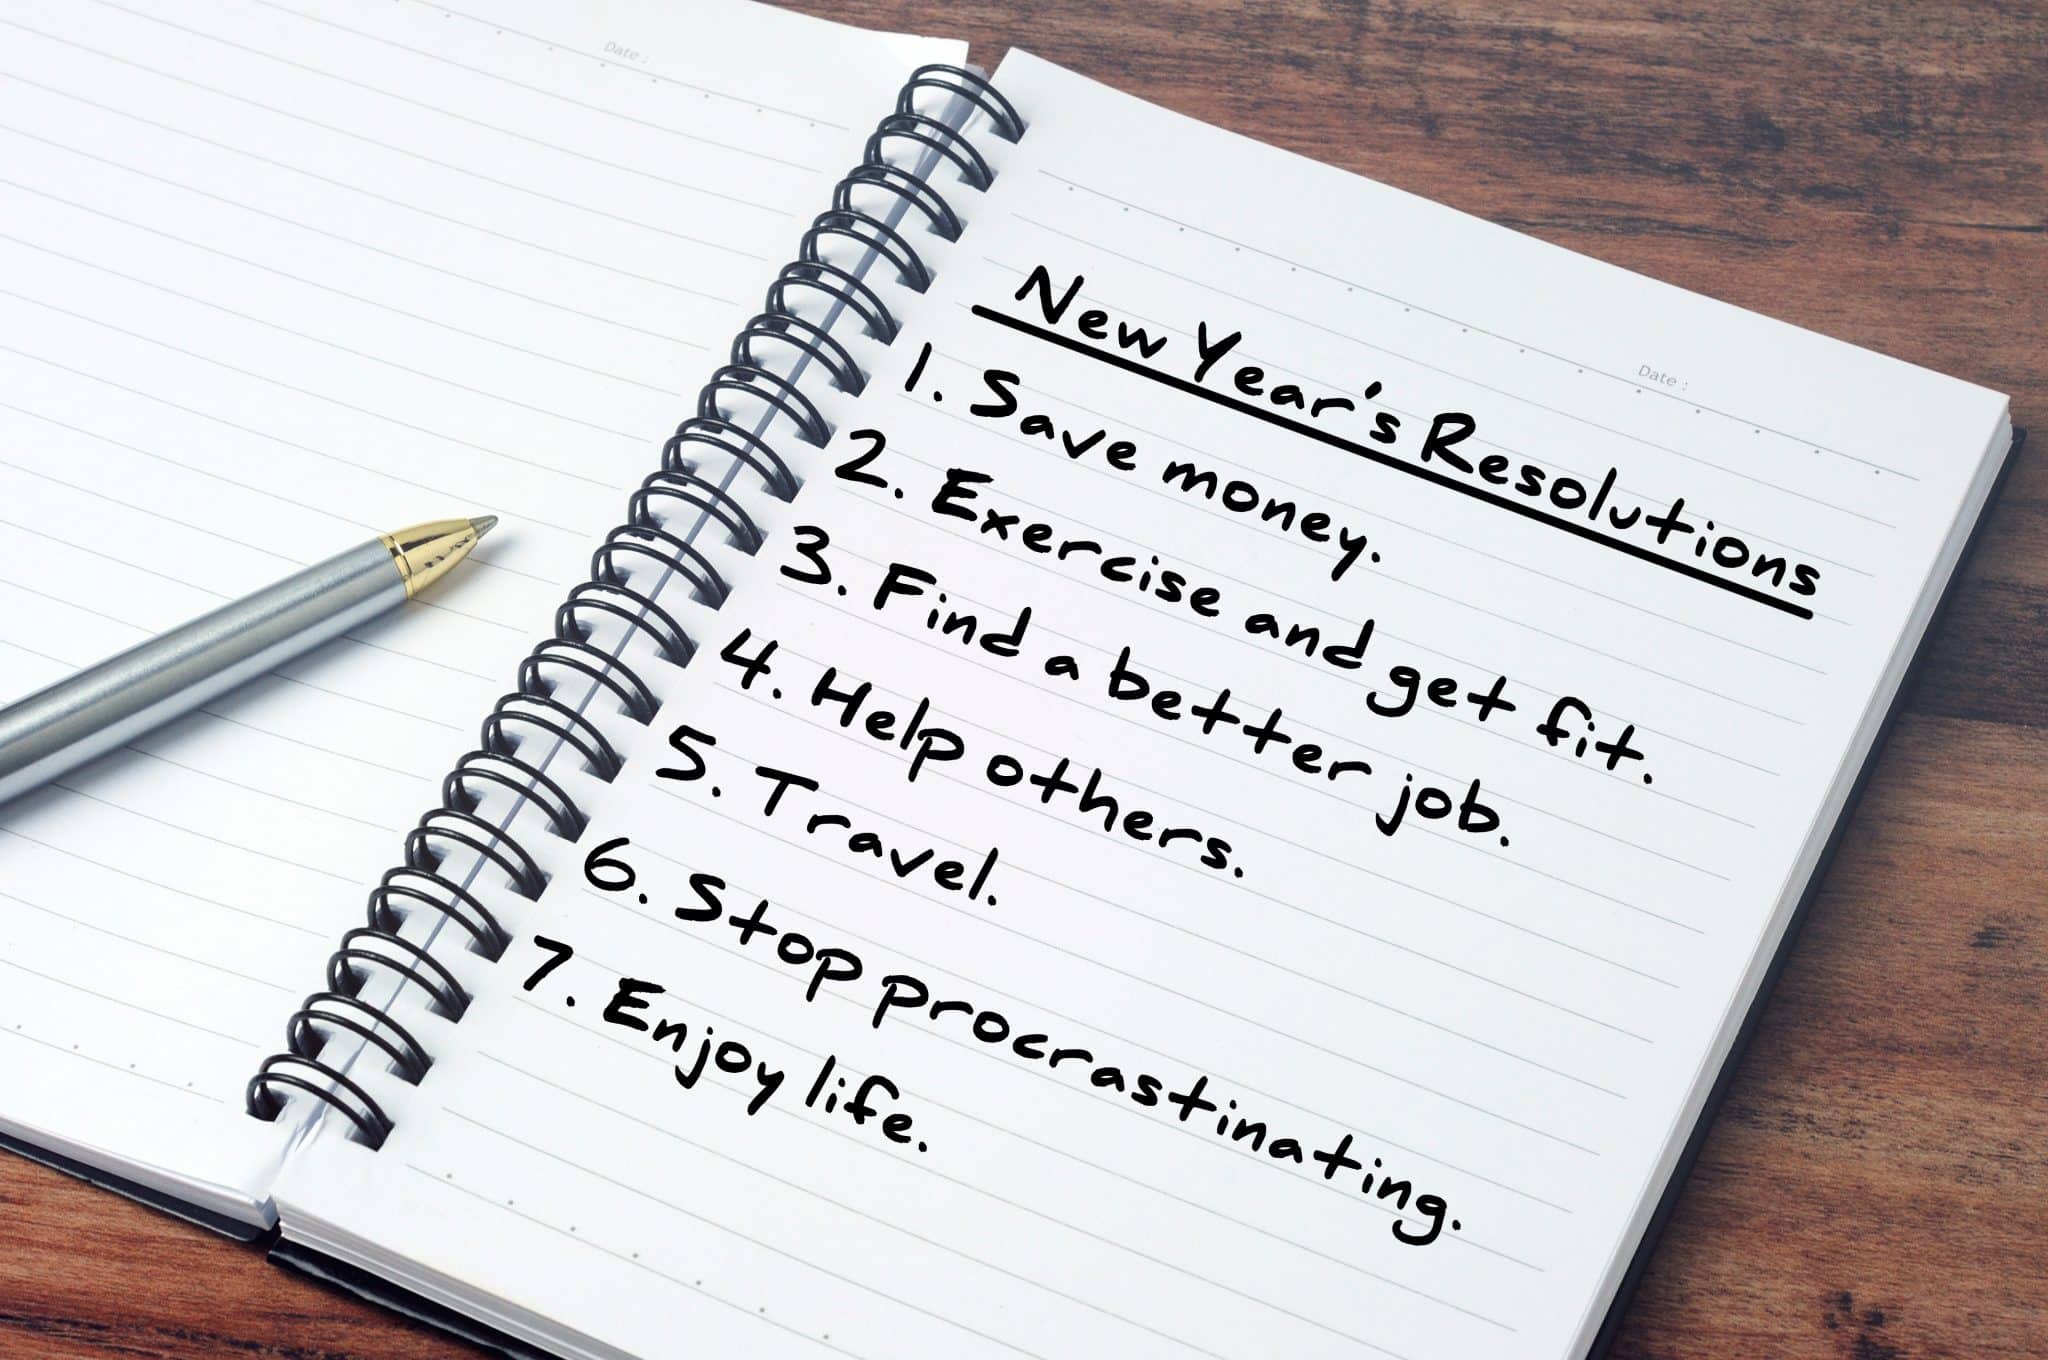 Still making New Year's Resolutions? Here's an idea for an easy and painless one